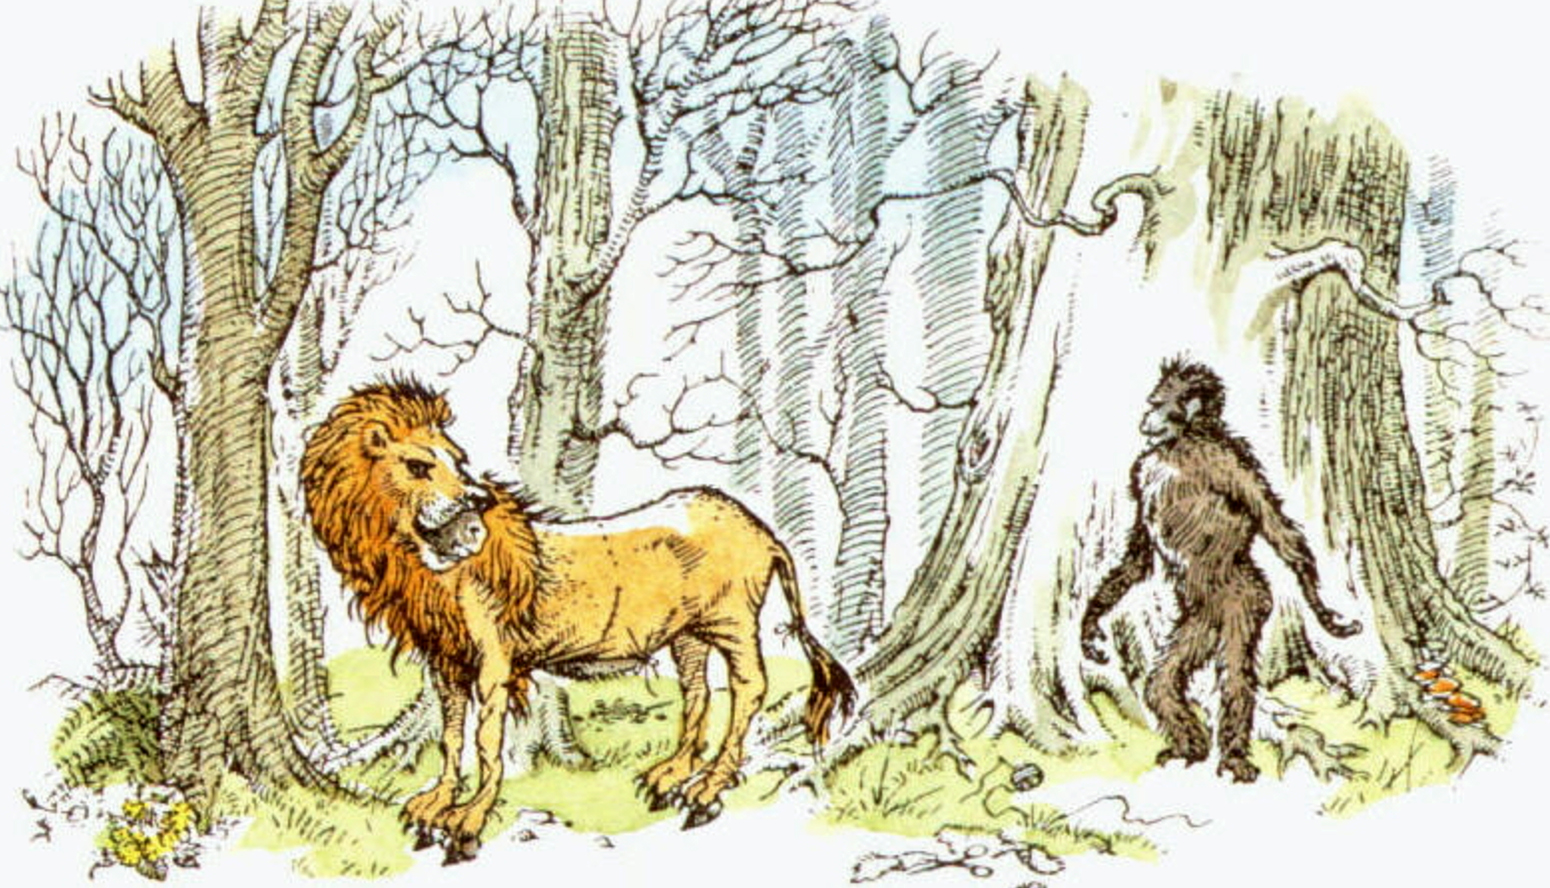 Revisiting 'The Last Battle': C.S. Lewis' Narnia tale for our times